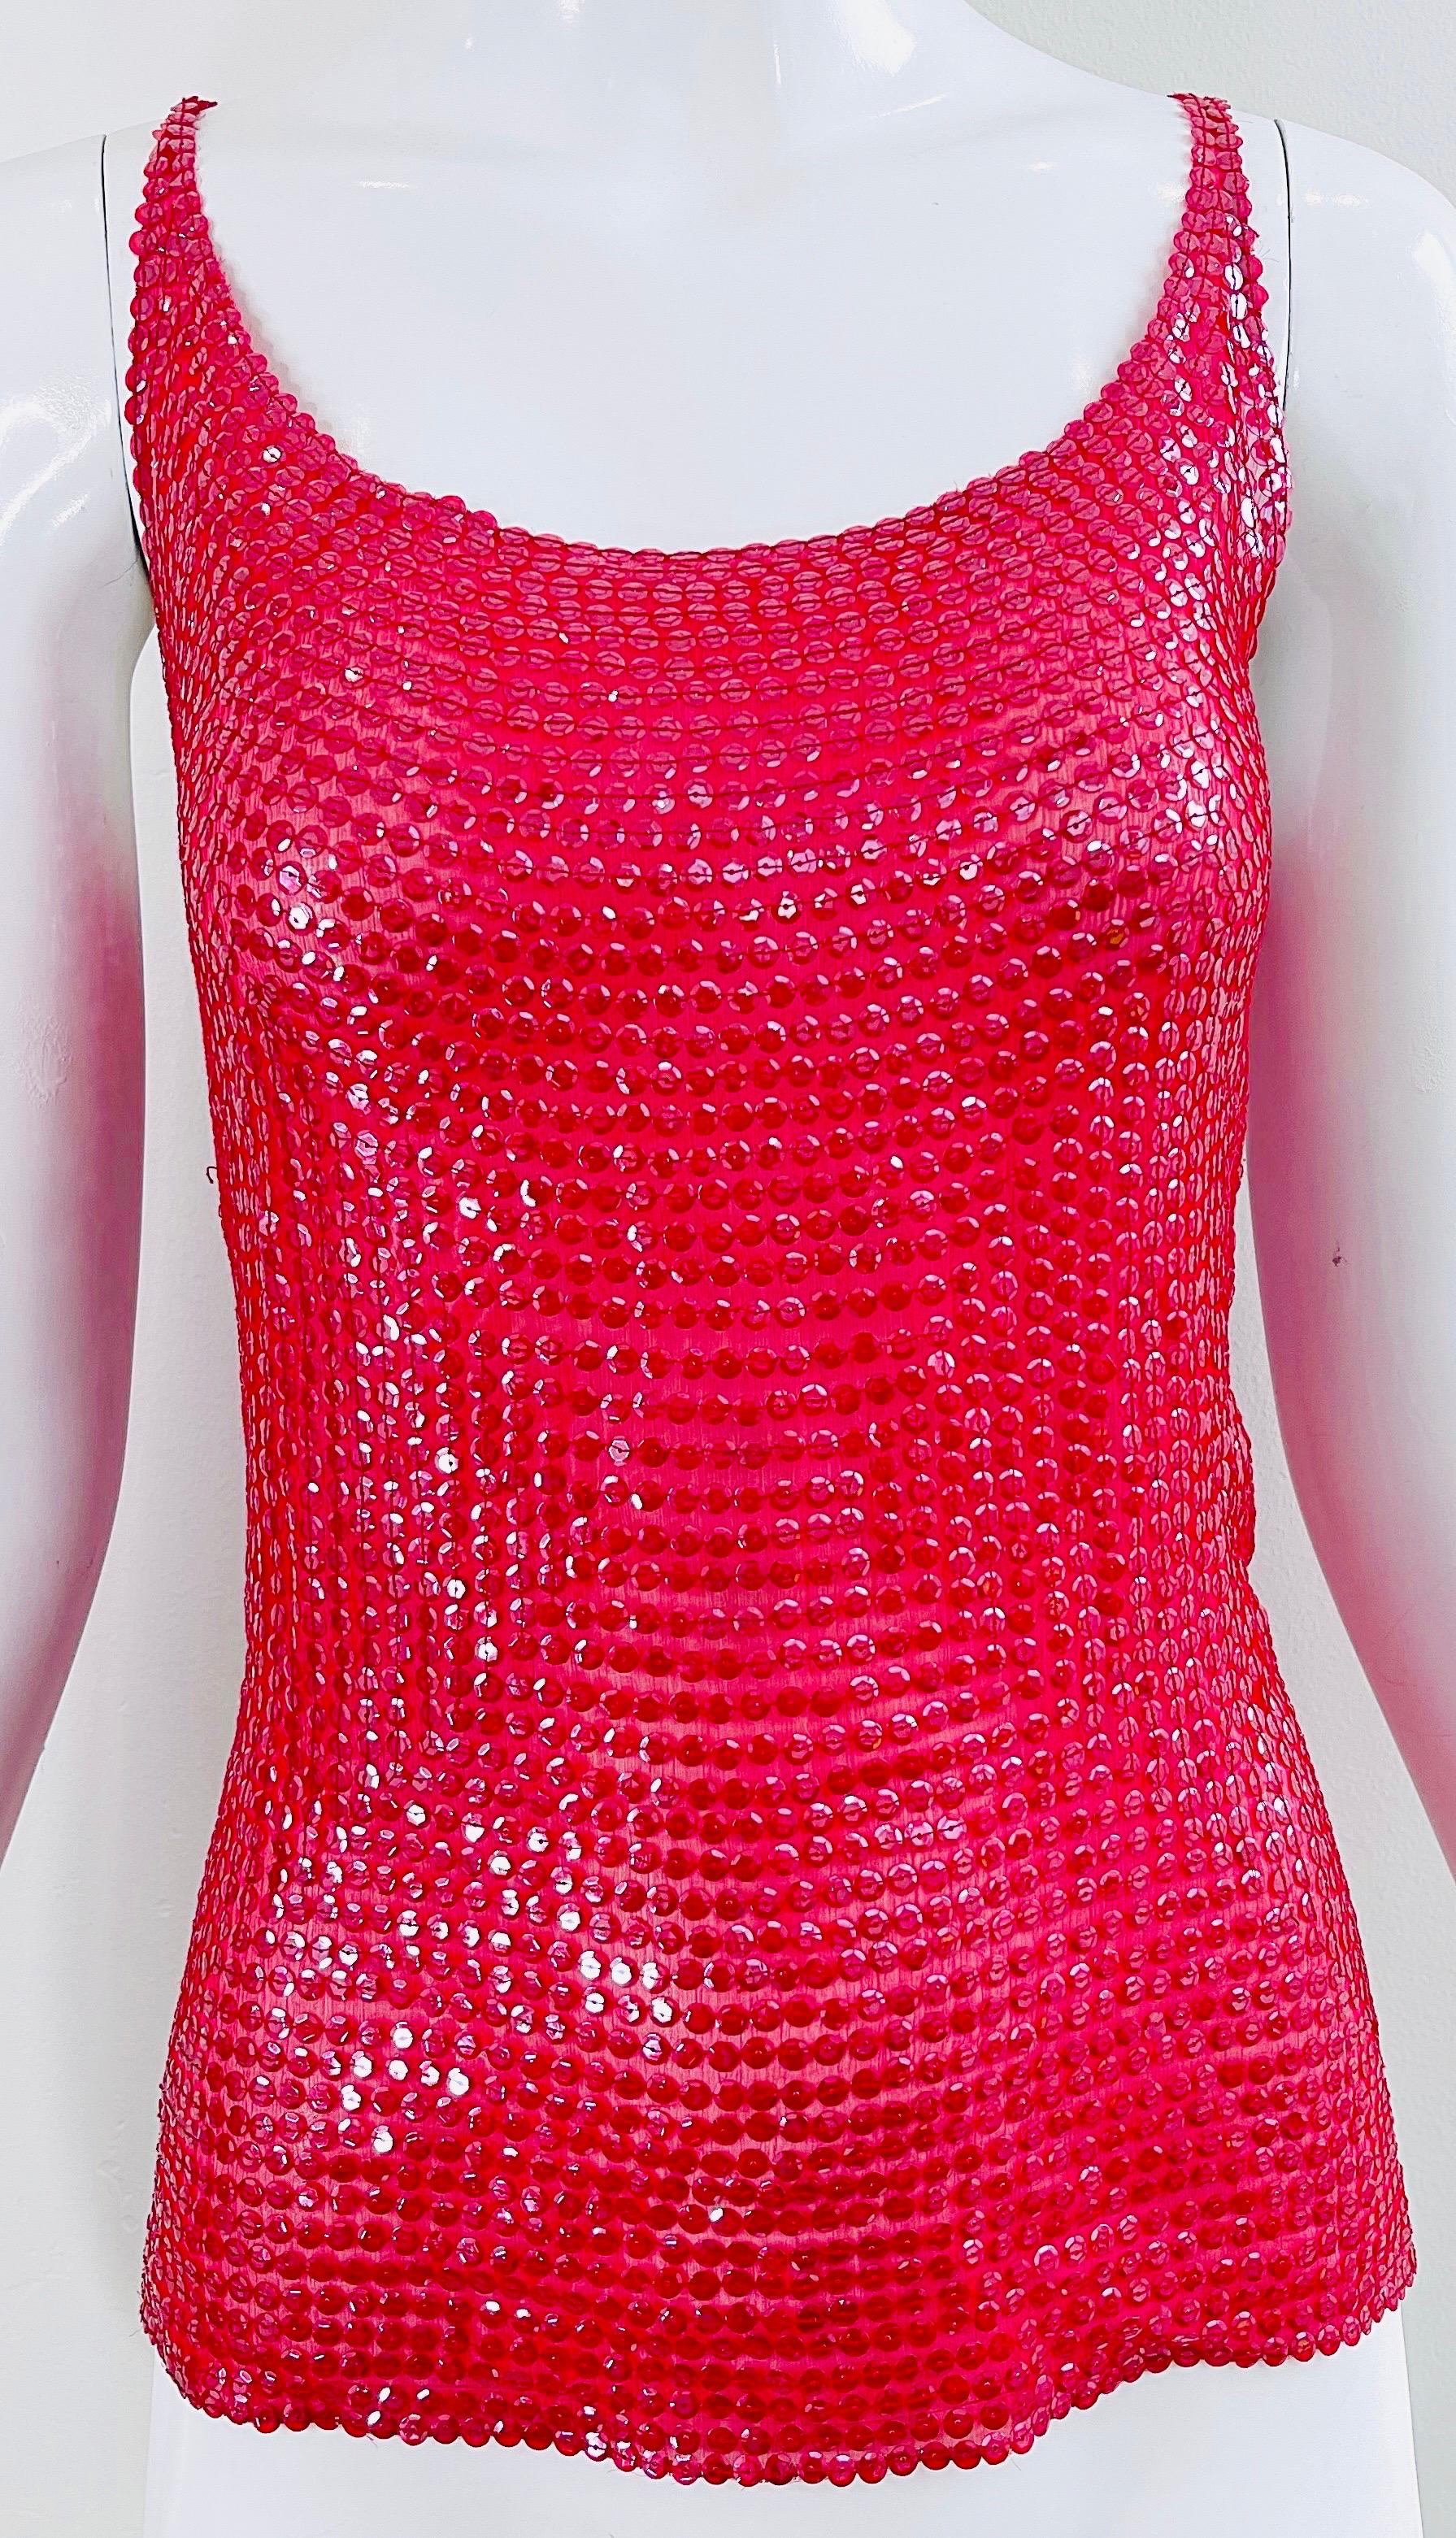 Halston 1970s Lipstick Red Silk Chiffon Fully Sequin Vintage 70s Sleeveless Top For Sale 5